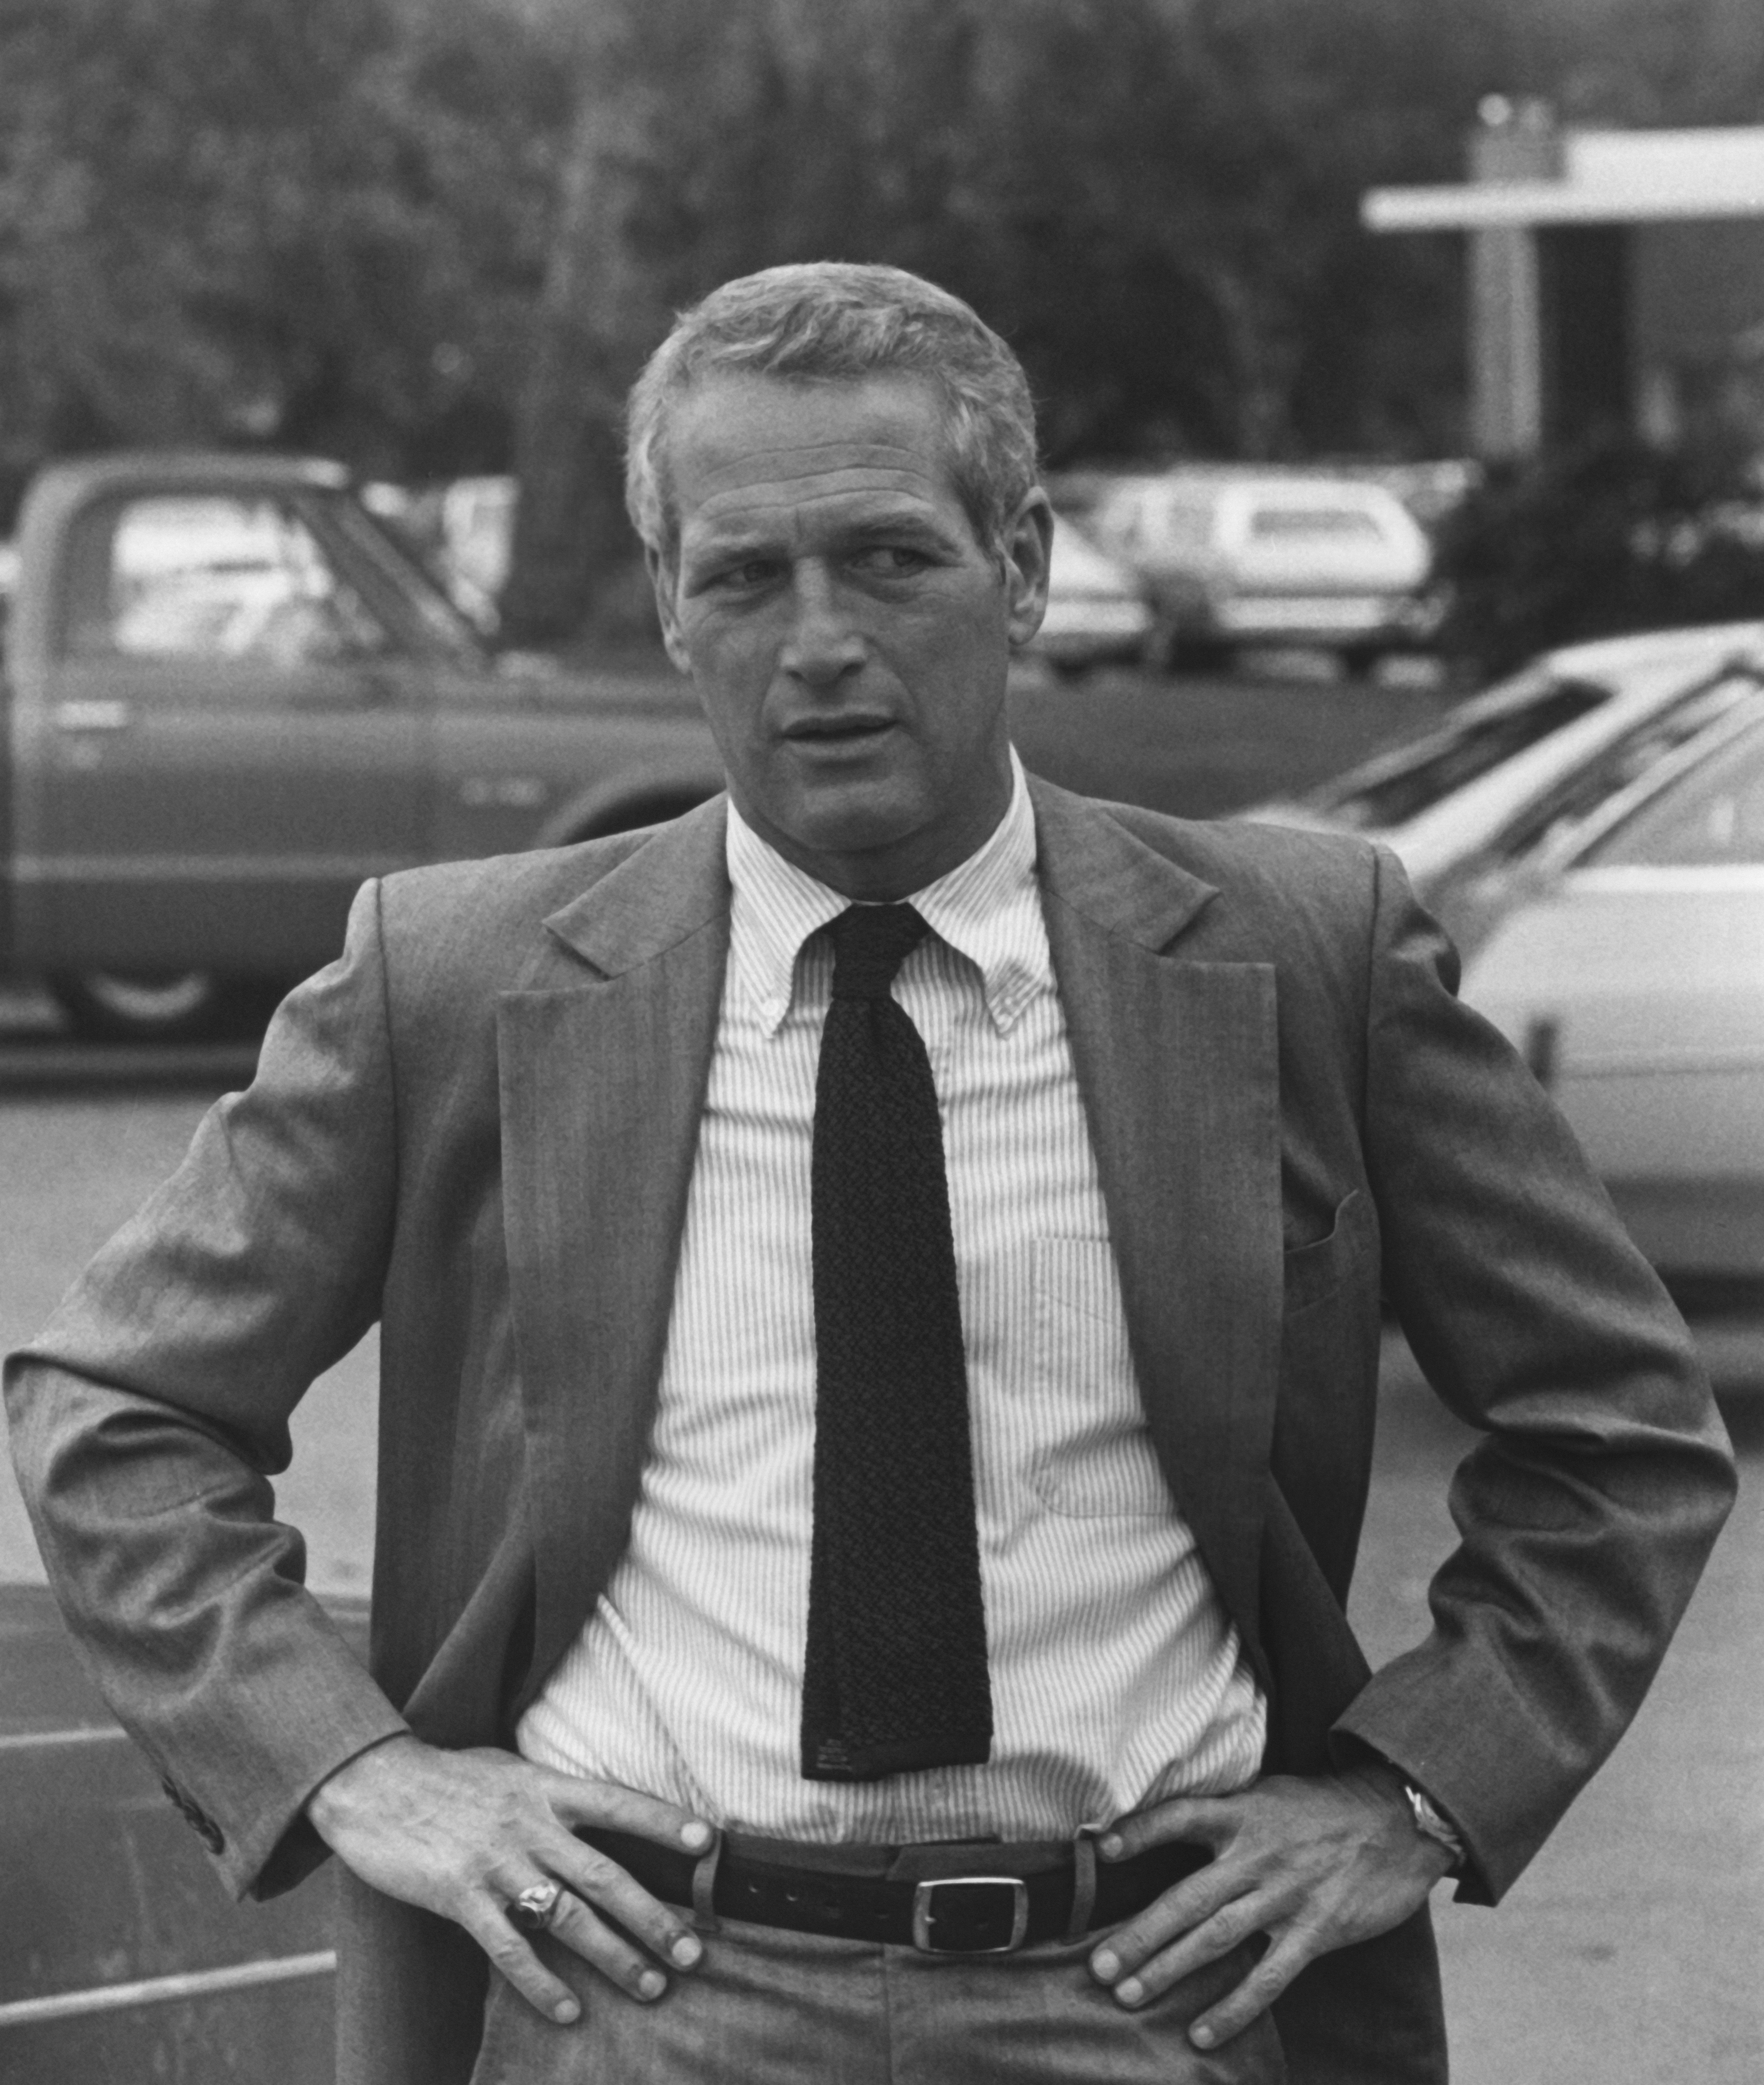 Man in suit with hands on hips standing in front of cars